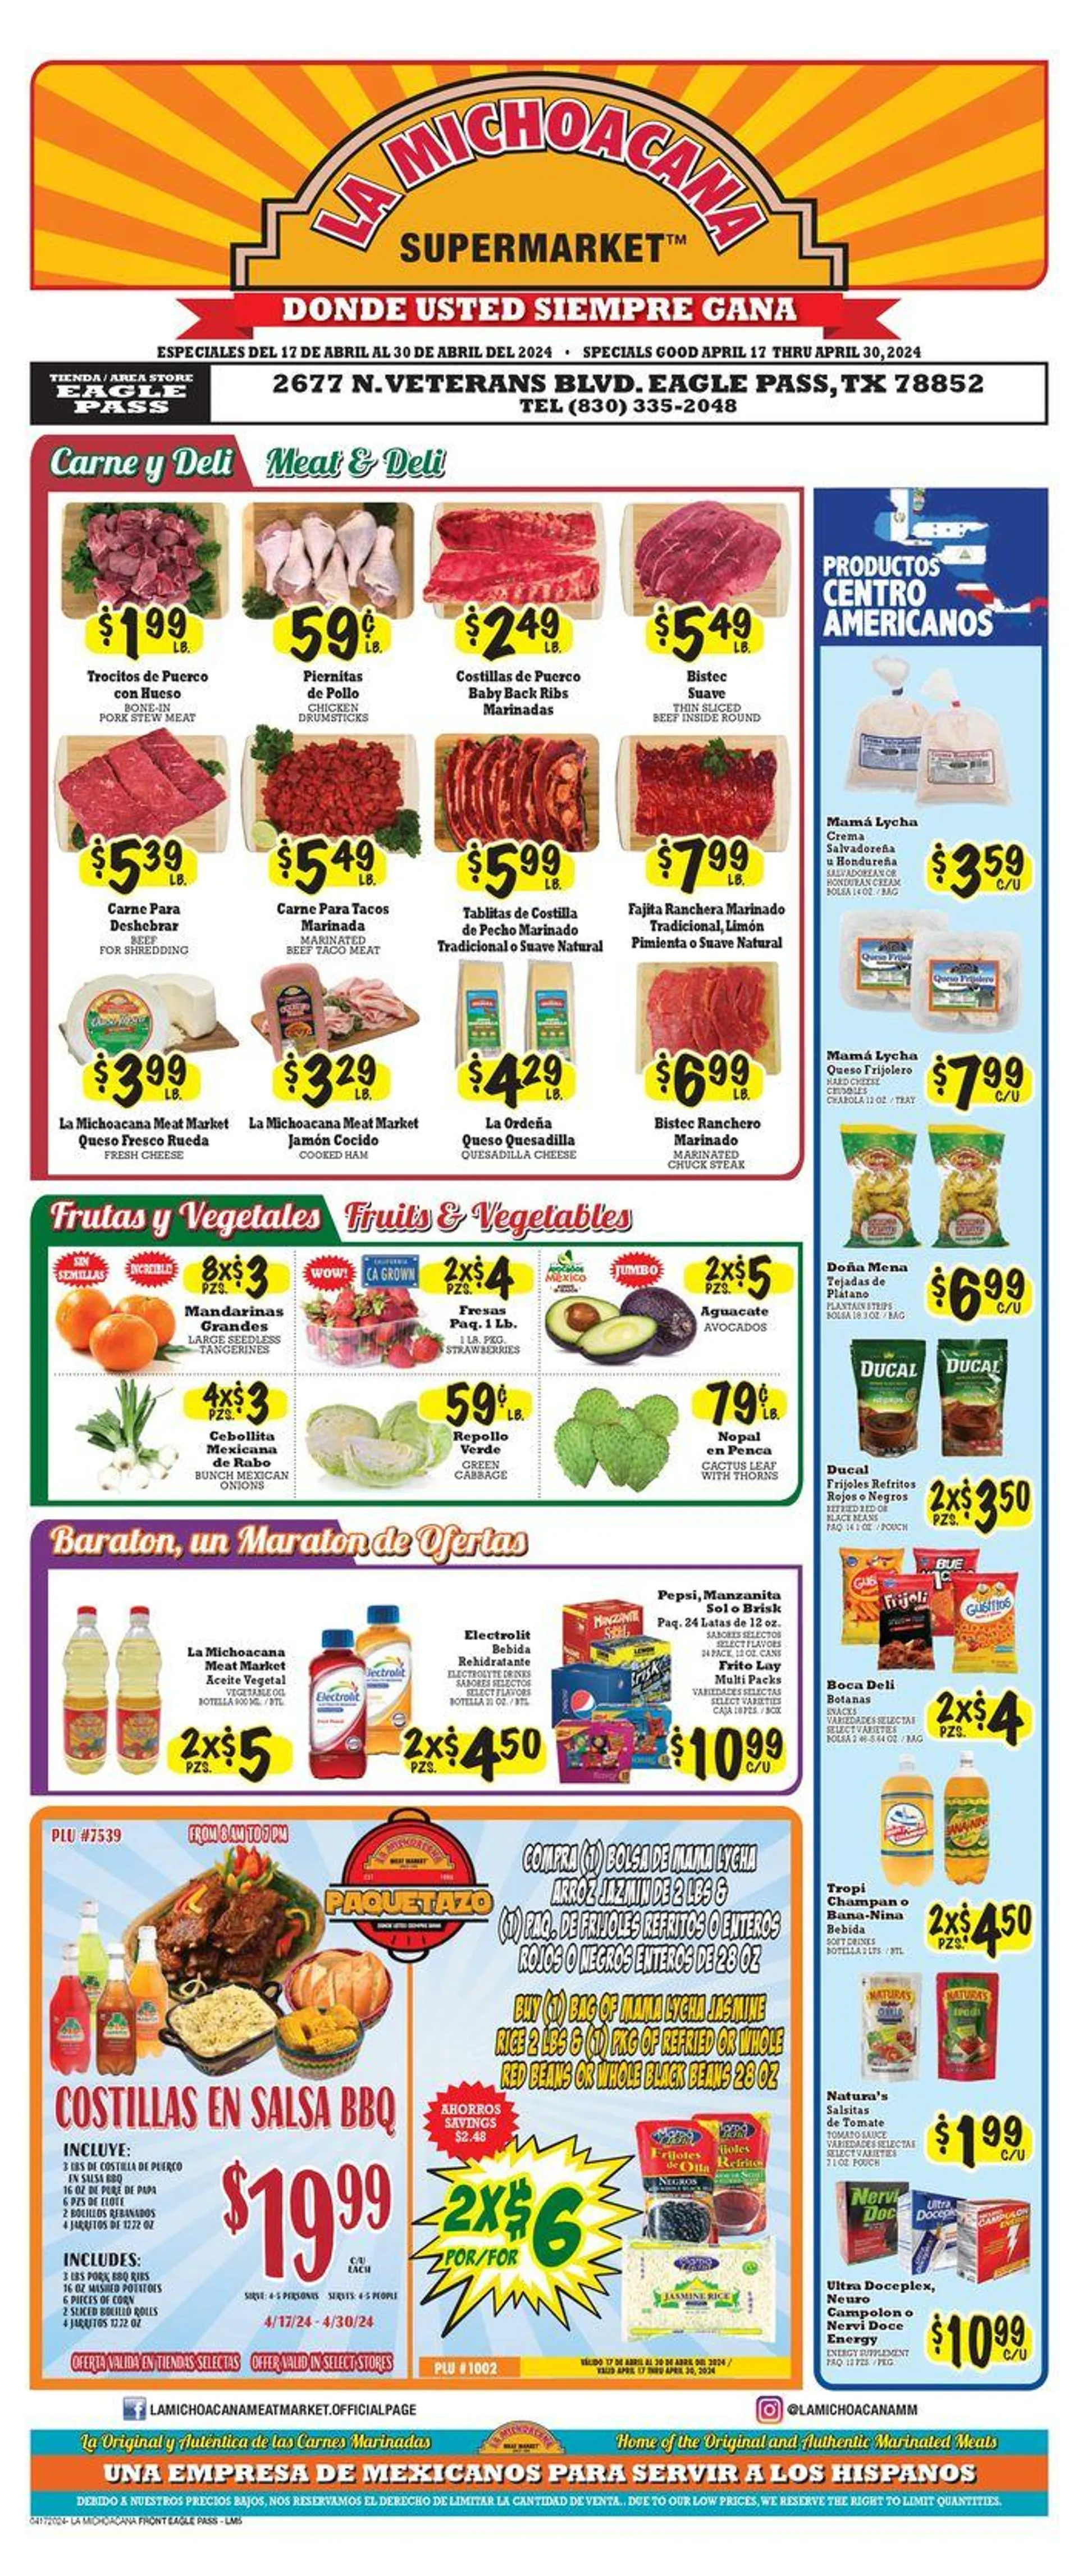 New Weekly ad - 1